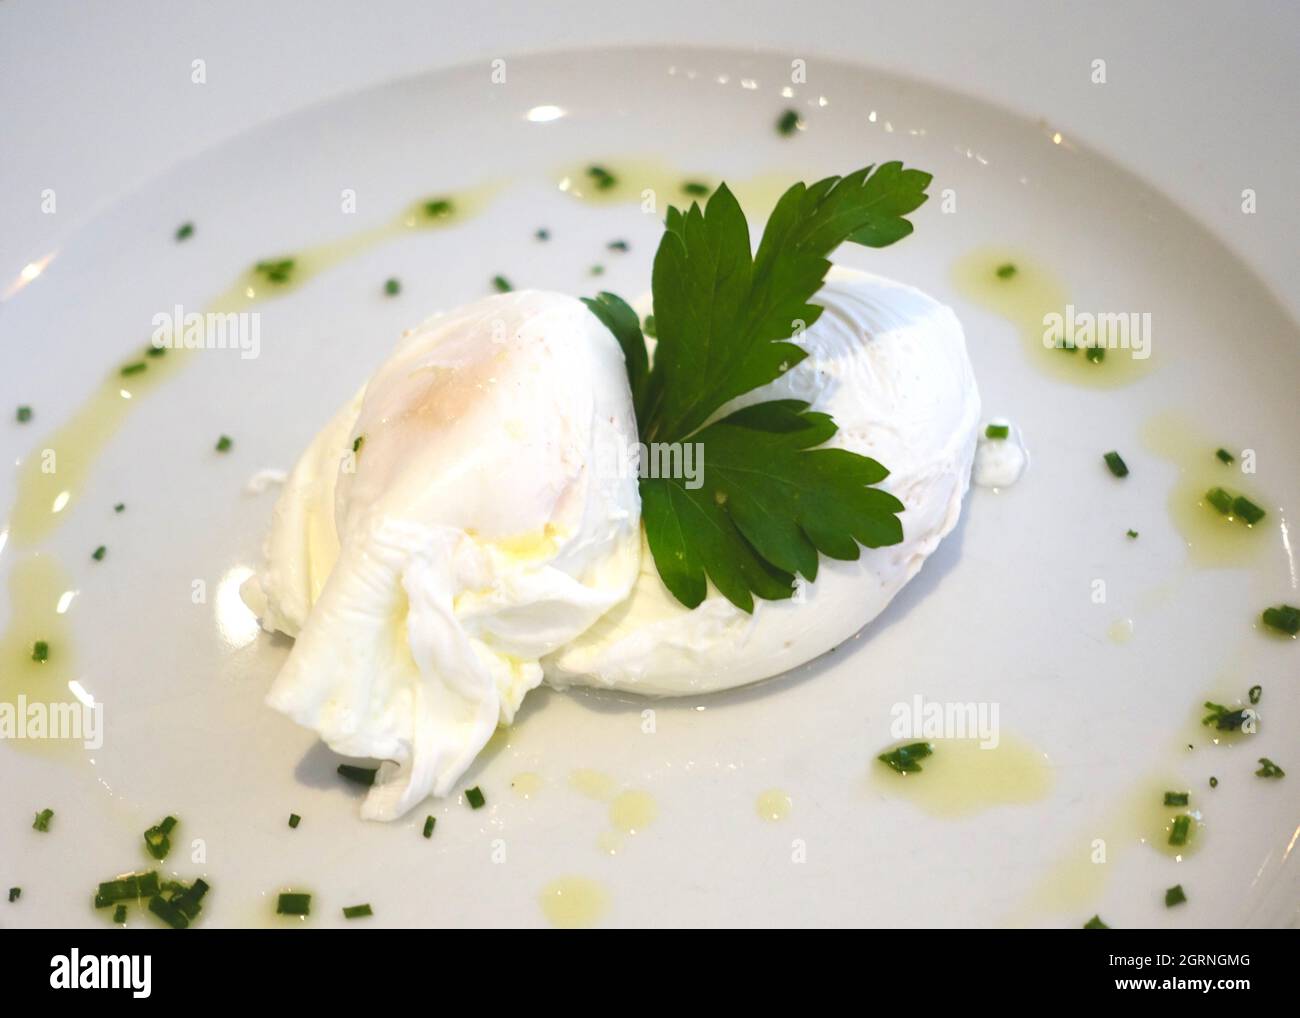 Close-up Of Food In Plate Stock Photo